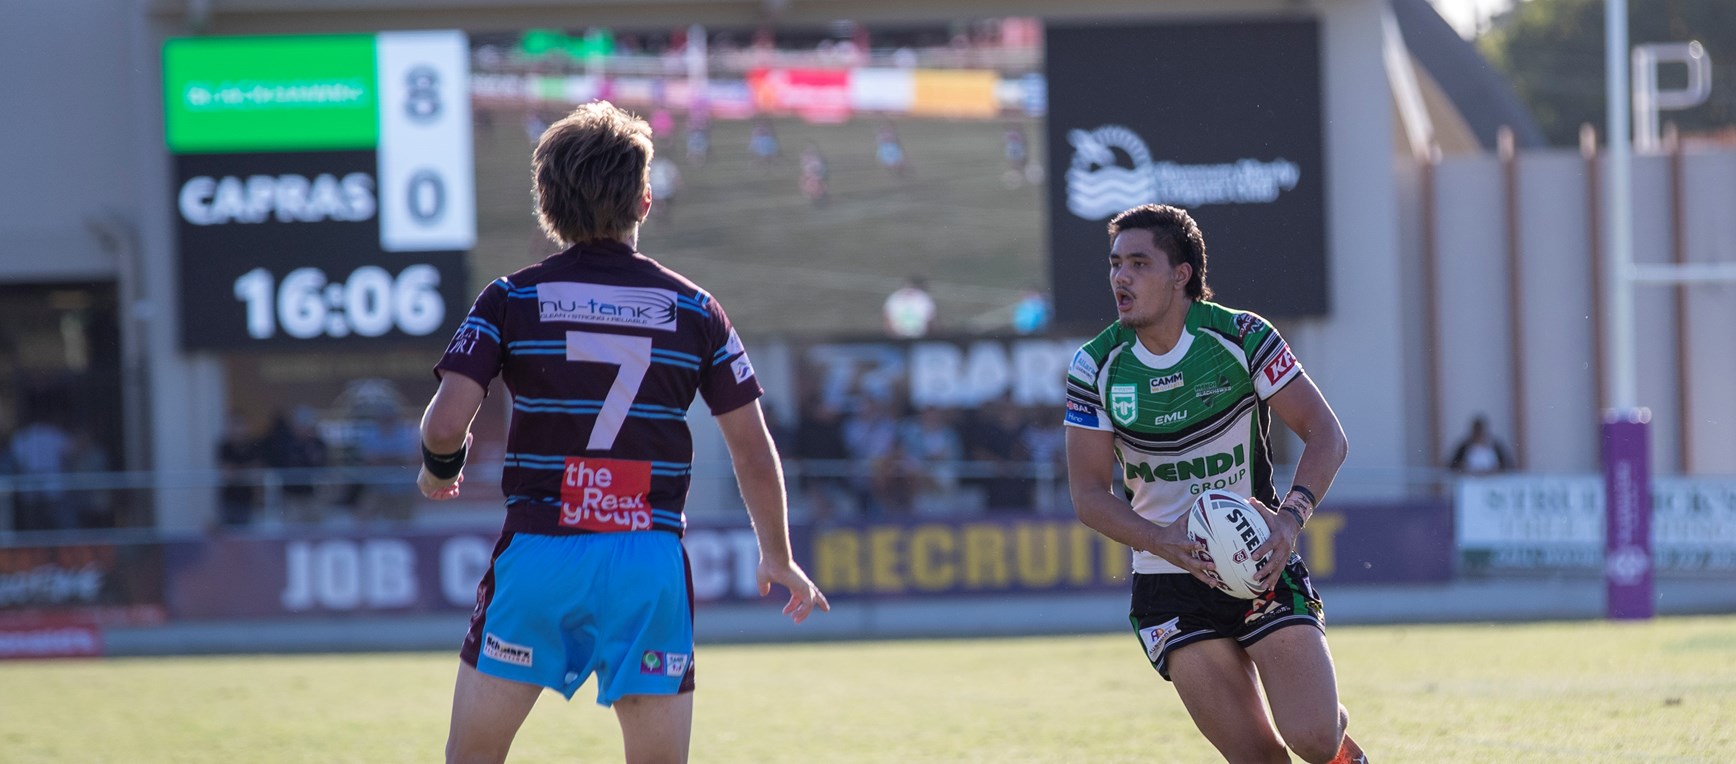 In pictures: Auswide Bank Mal Meninga Cup semi finals